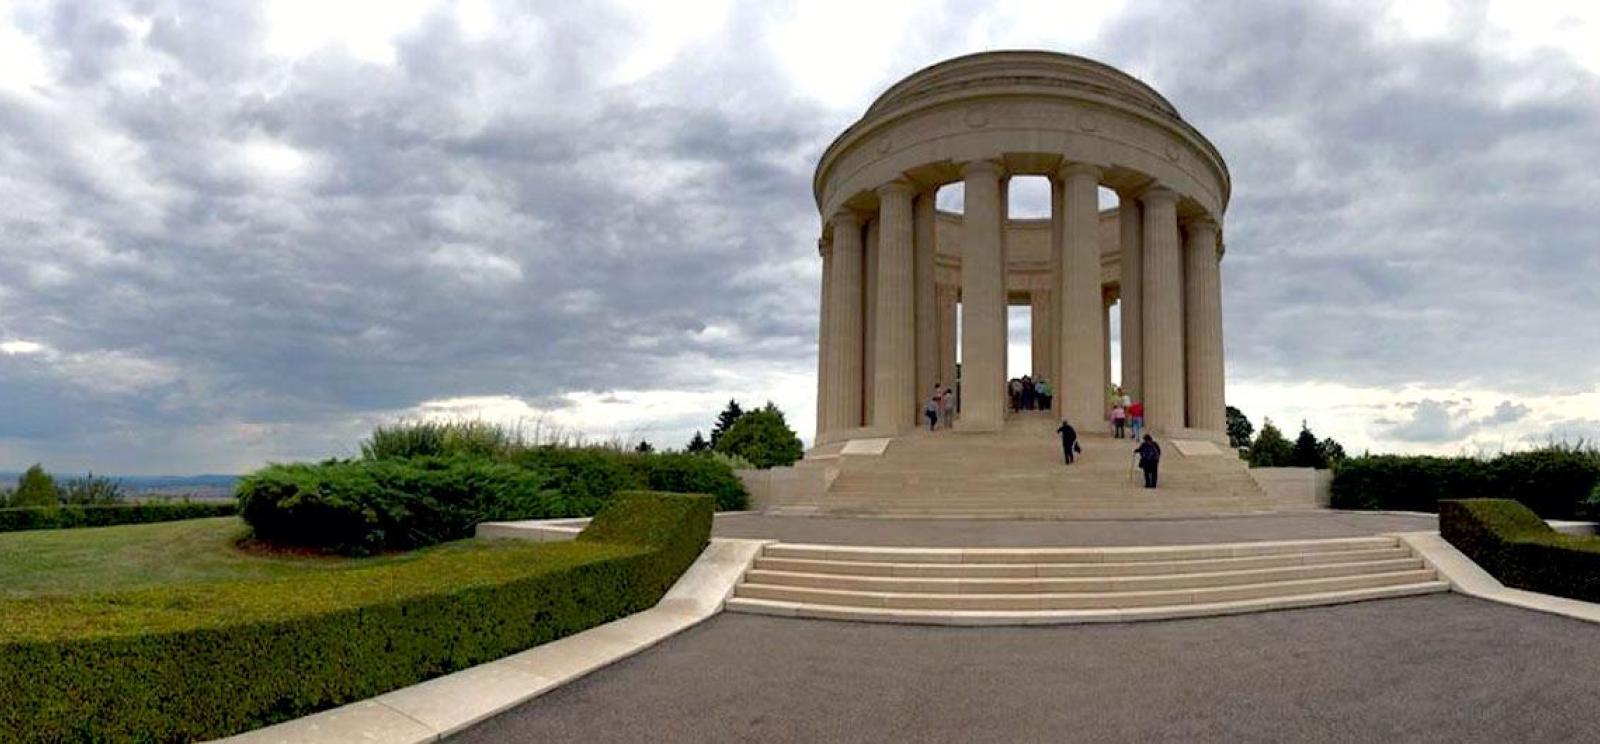 Panorama shot of a Classical-style monument